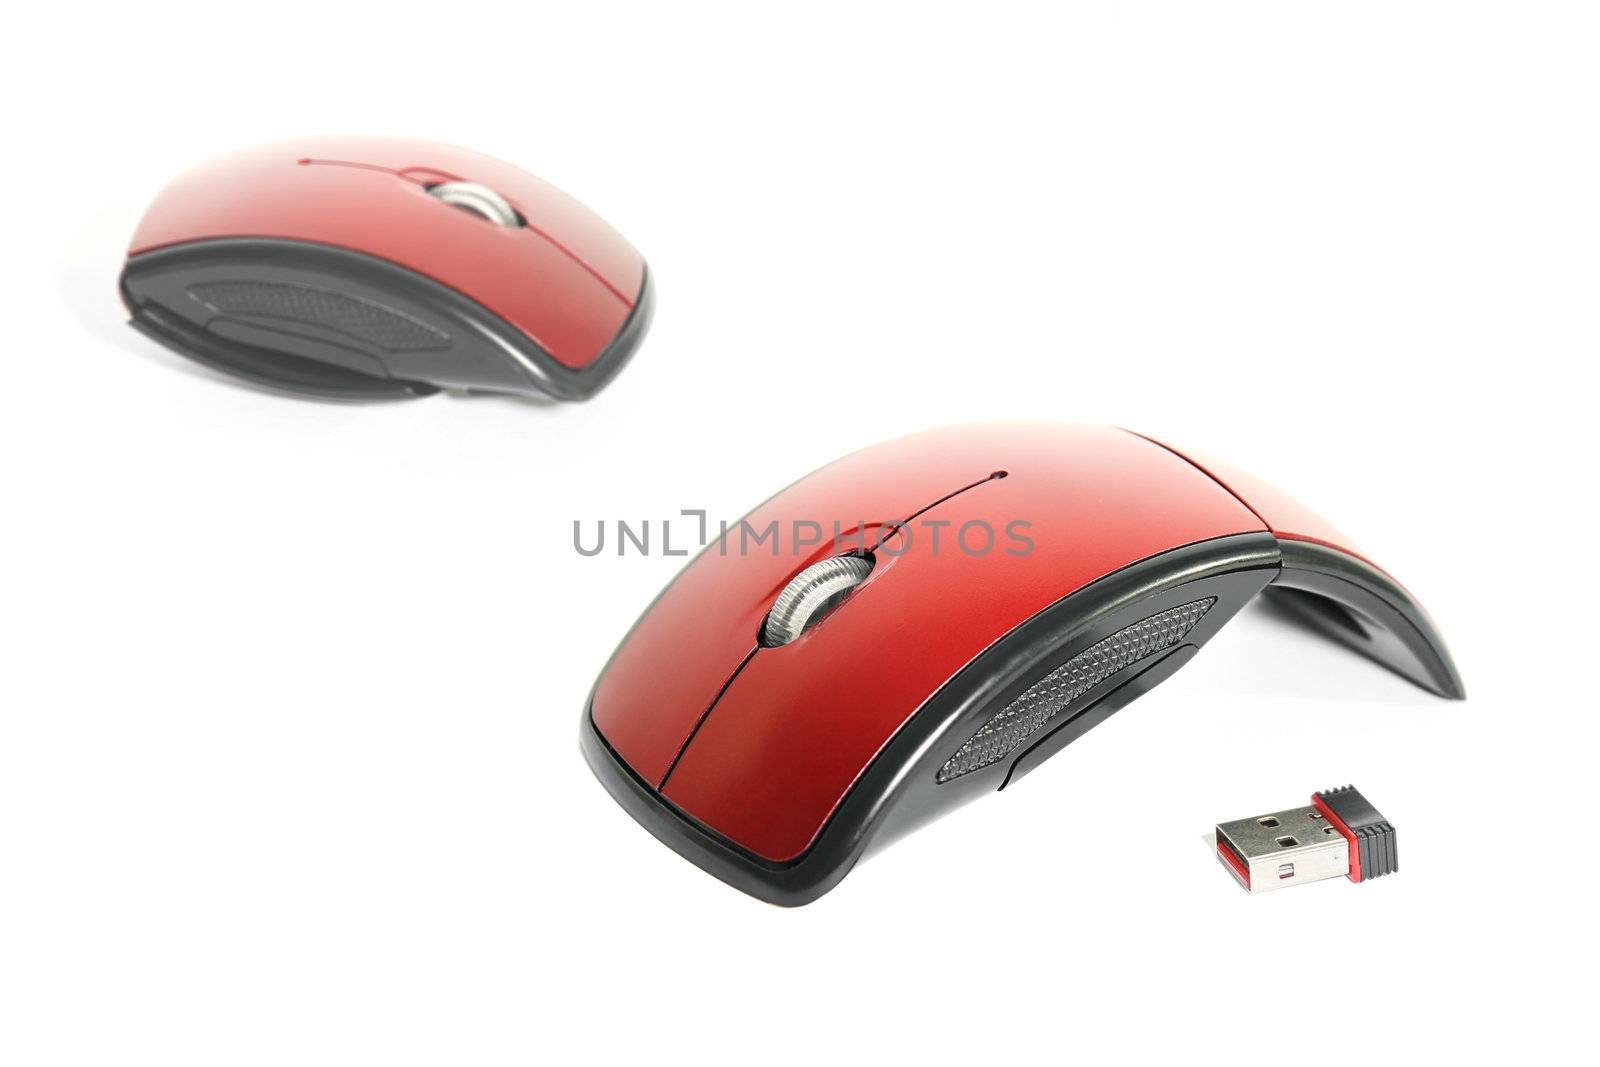 Highly portable, red wireless optical mouse with USB wireless dongle.